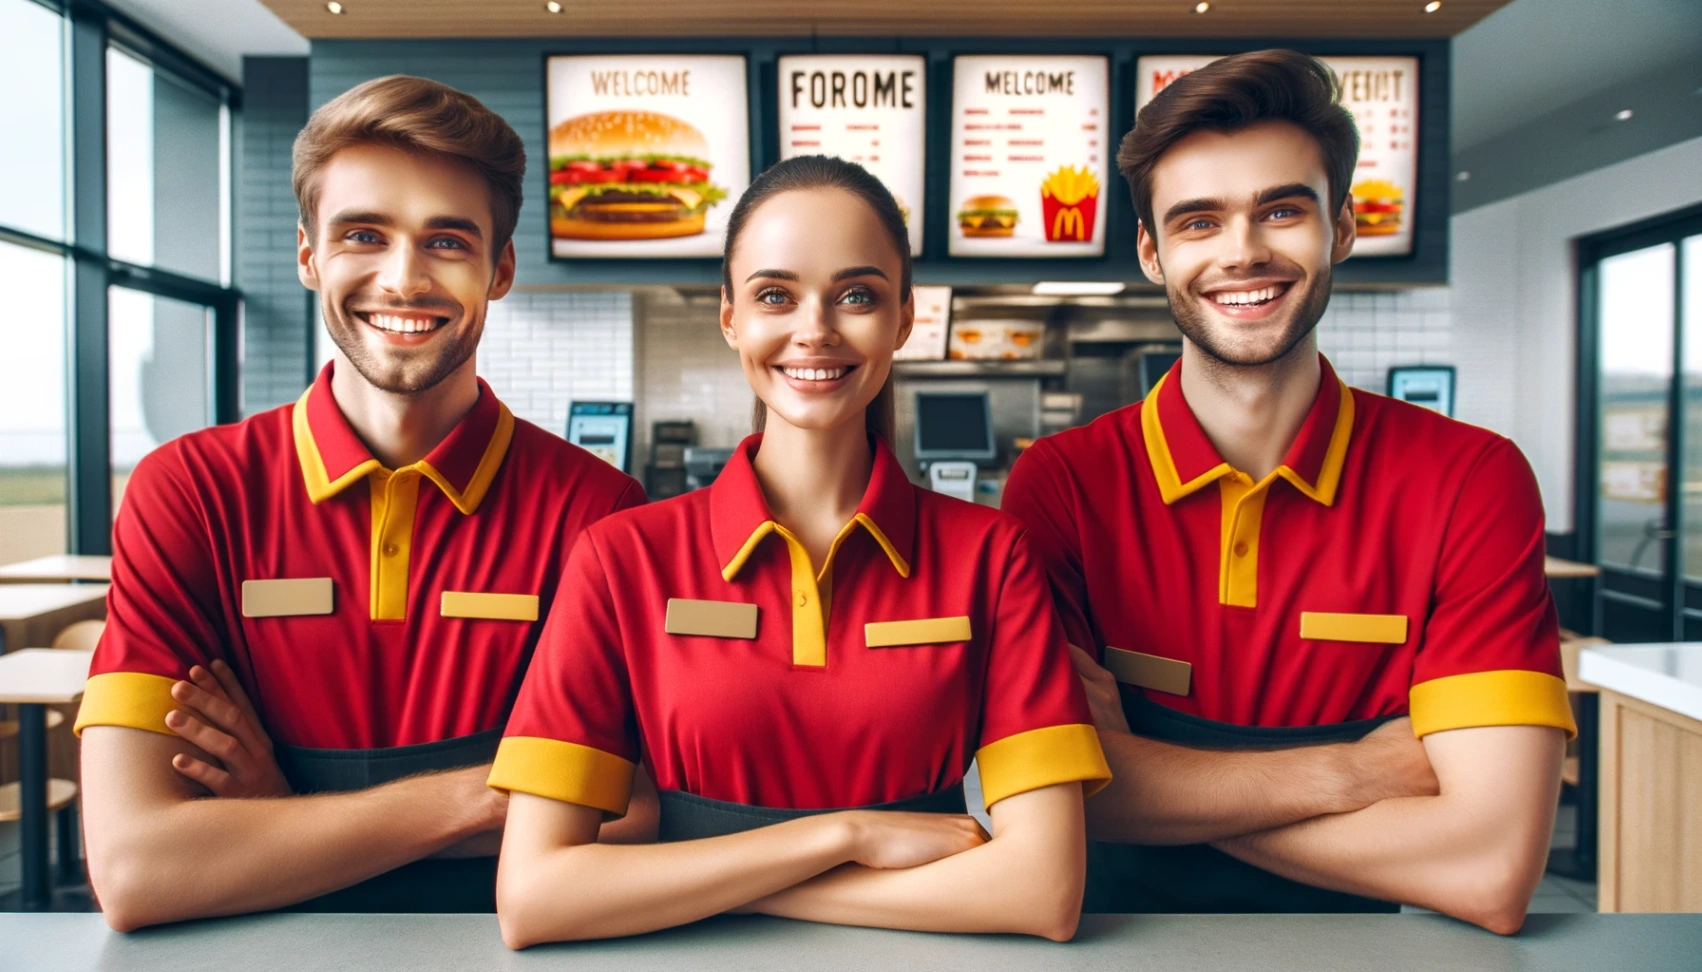 McDonald's Careers: How to Apply for Job Openings